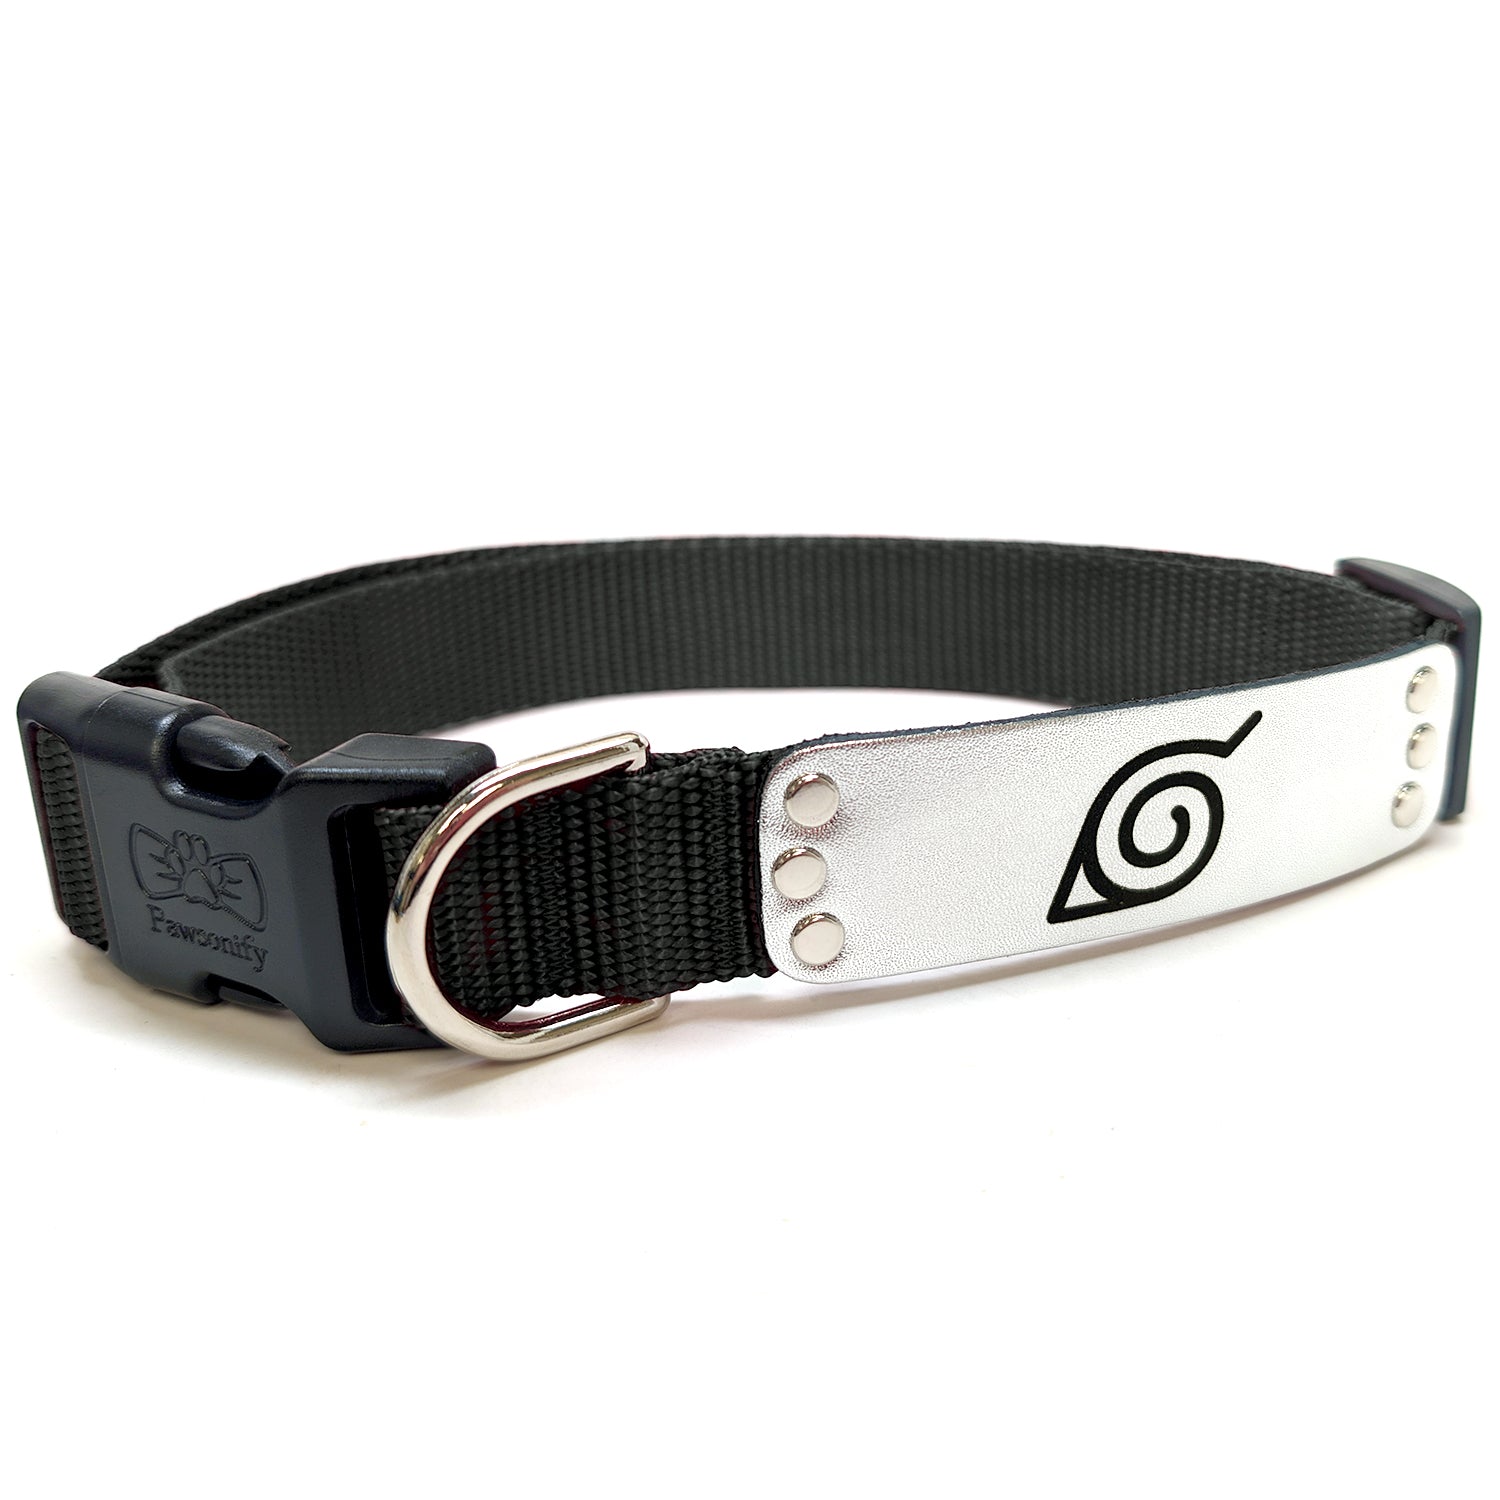 Naruto Shippuden x Pawsonify - Officially Licensed Ninja Collar (Black) for Large Dogs #size_Dog: (L) 18-26